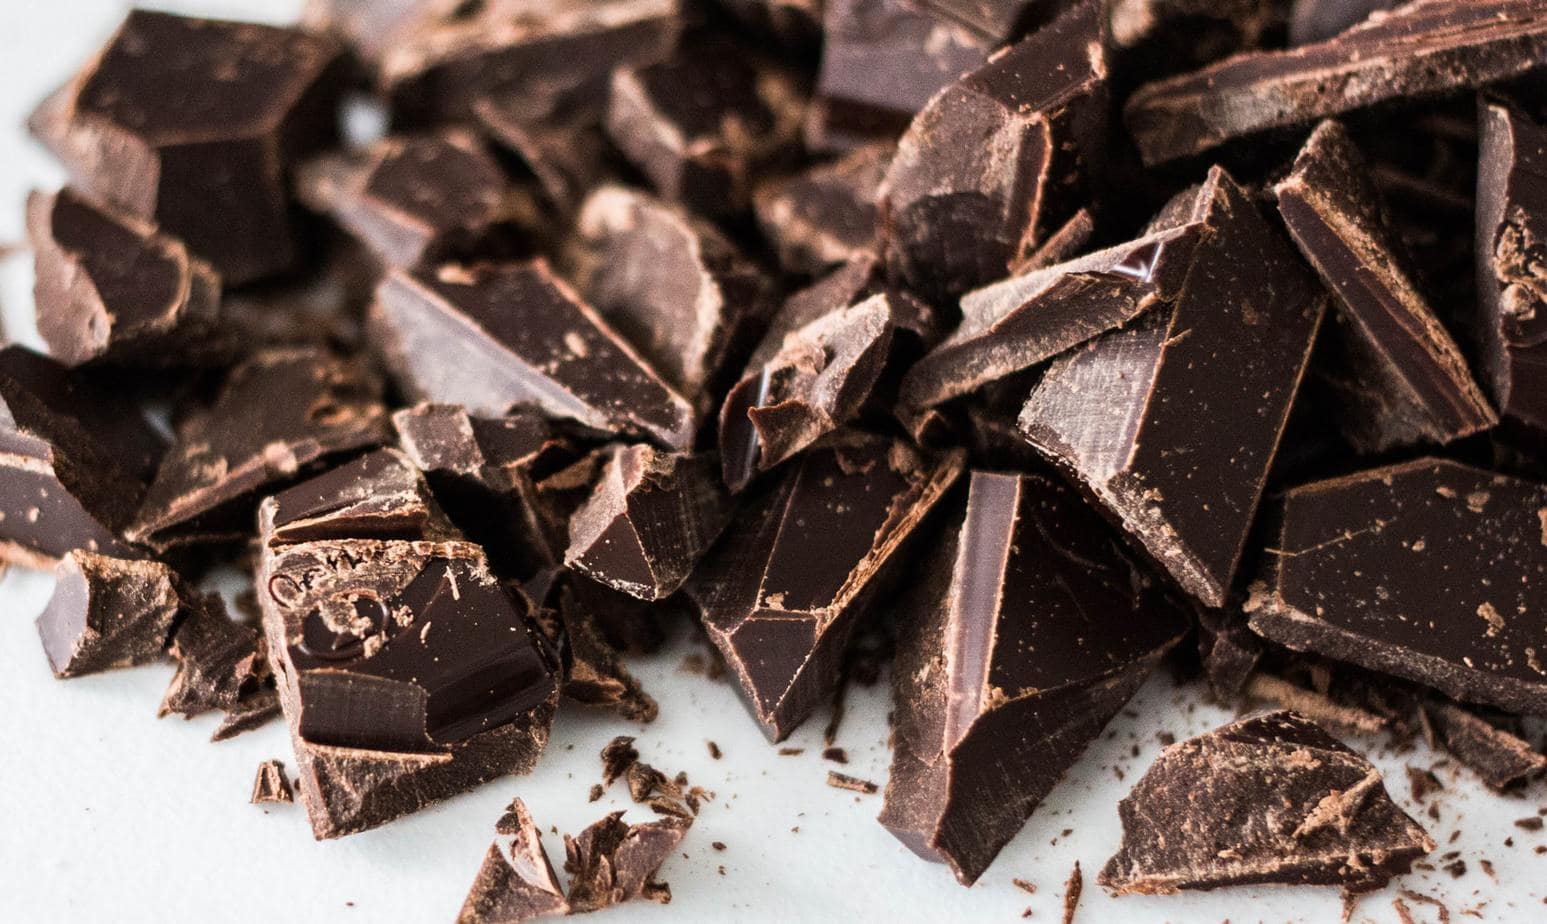 Chocolate-like products. How are they different from regular chocolate and why can they harm us?